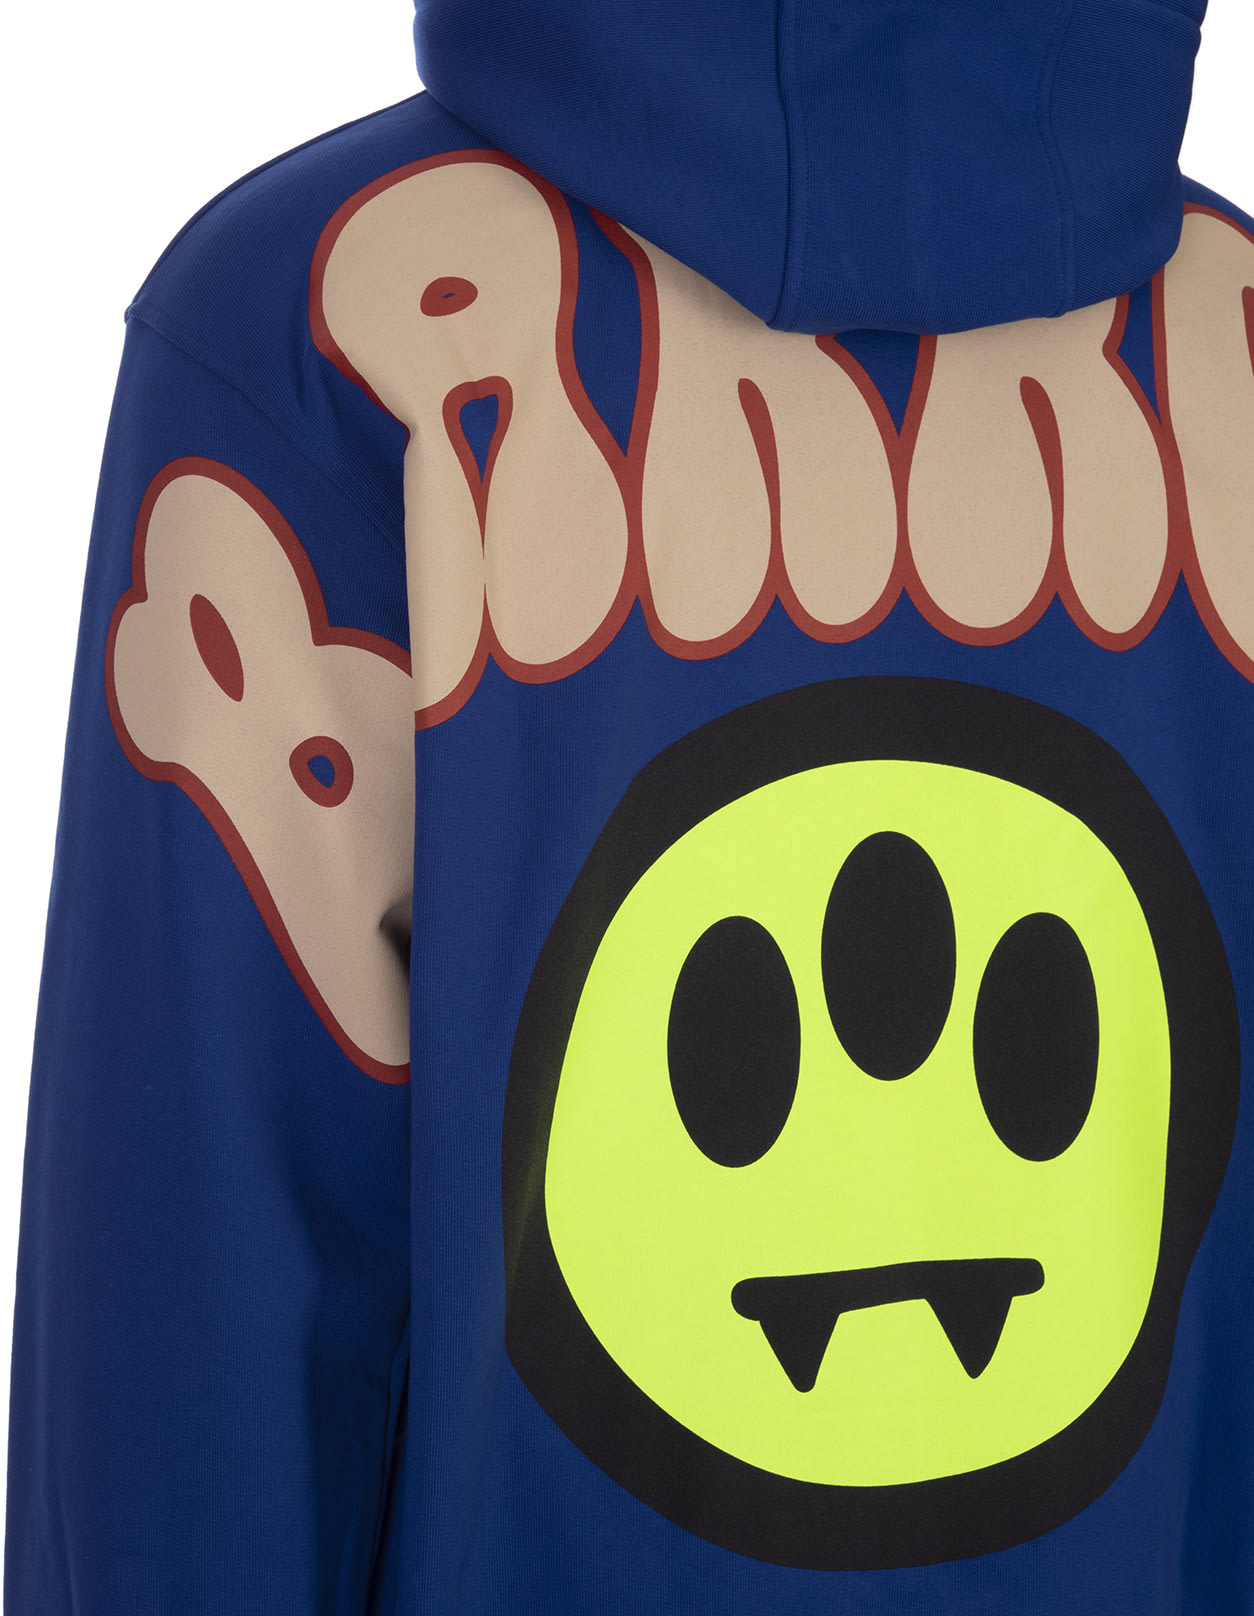 Shop Barrow Blue Hoodie With Front And Back Lettering Logo In Dazzling Blue